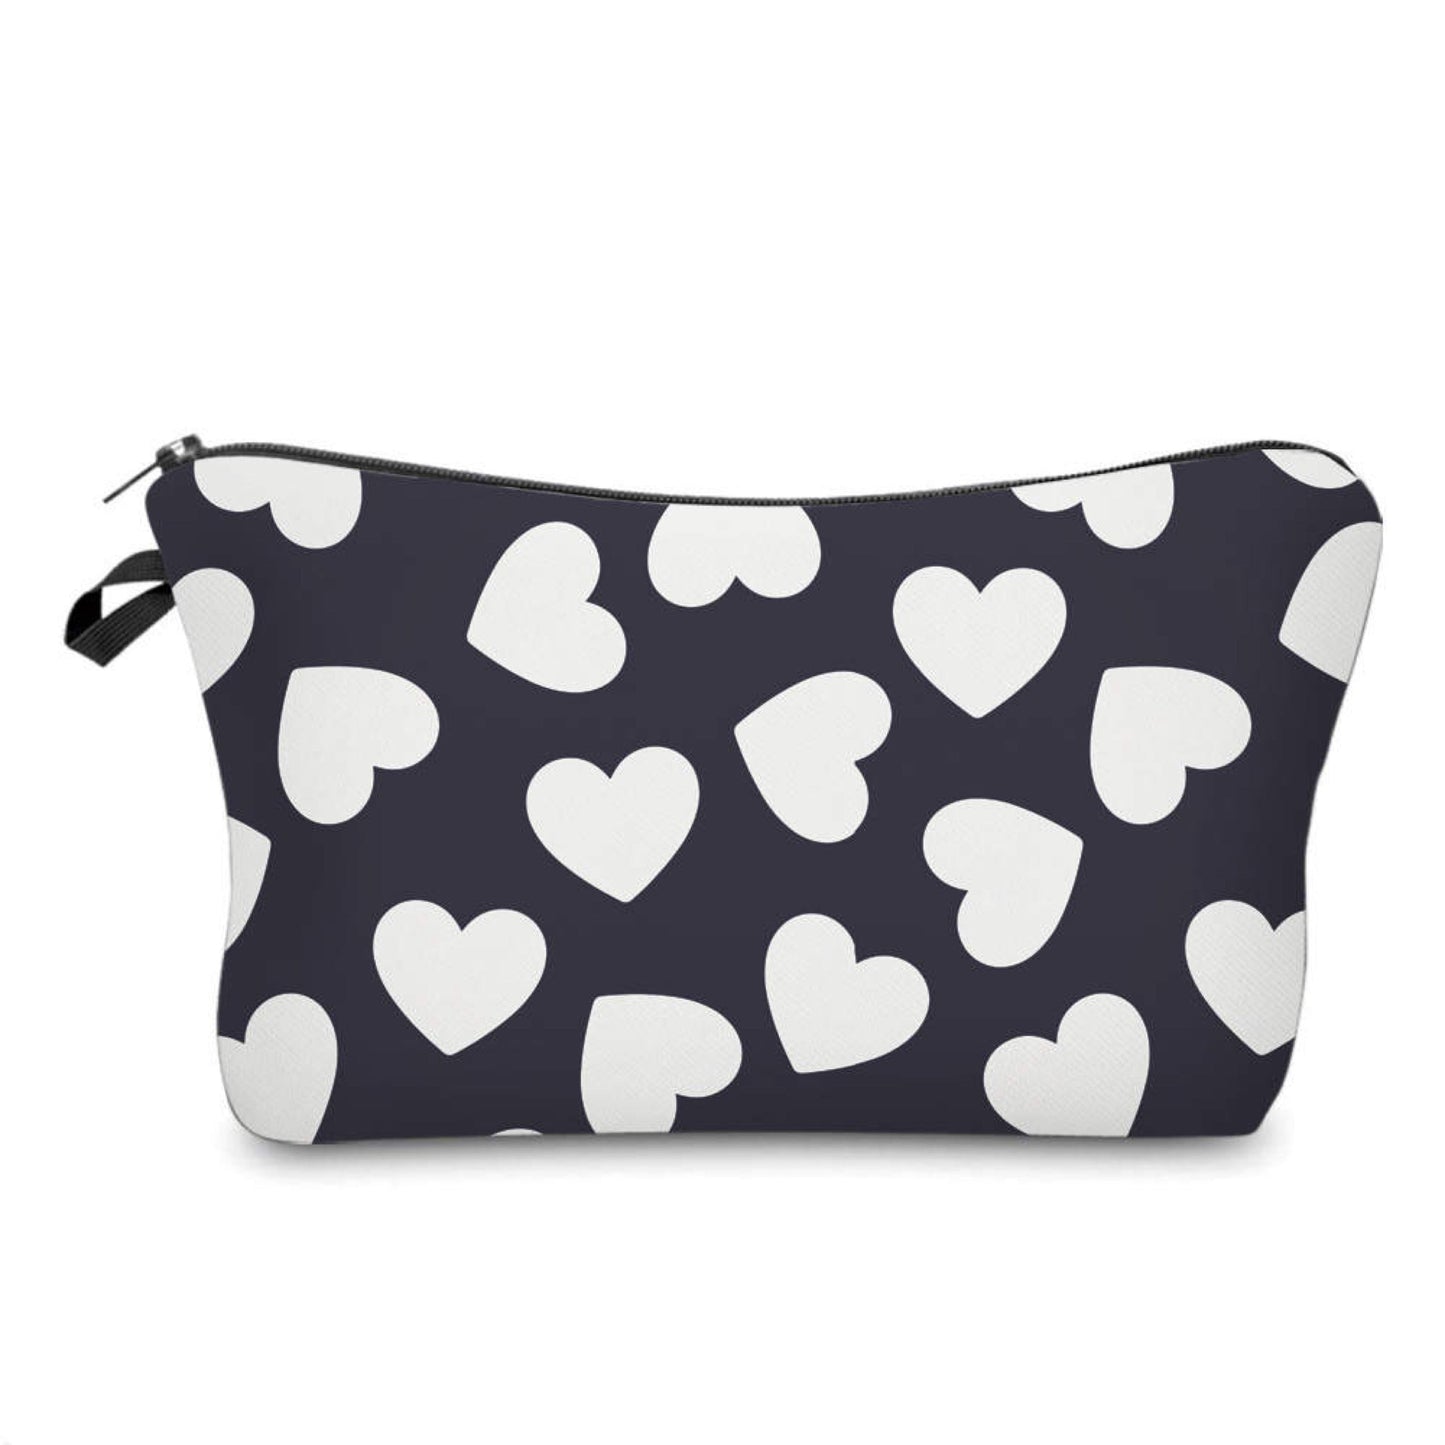 Pouch - Heart, Black and White